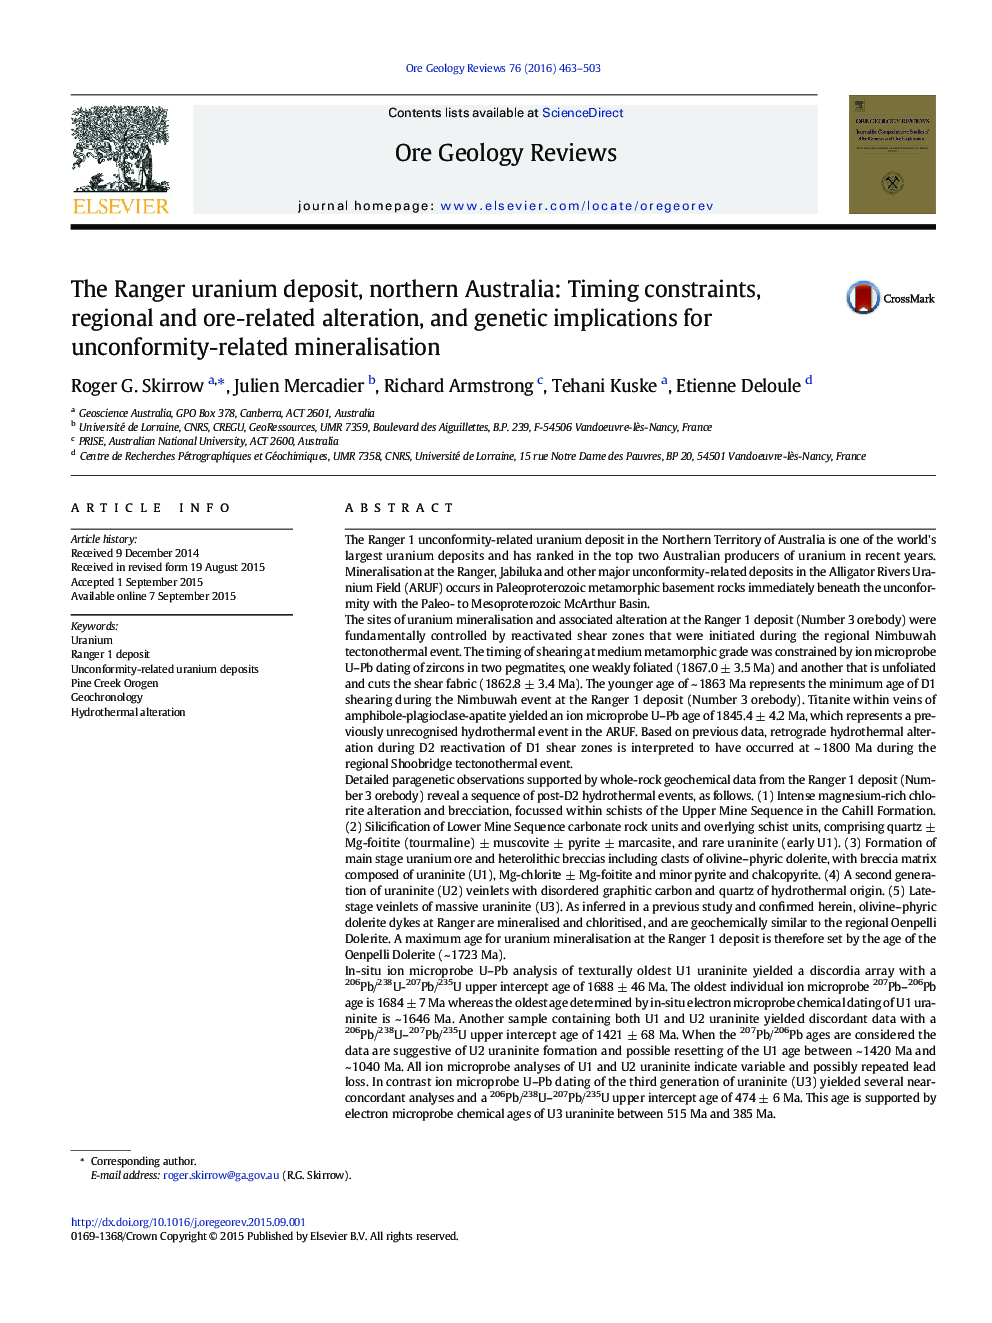 The Ranger uranium deposit, northern Australia: Timing constraints, regional and ore-related alteration, and genetic implications for unconformity-related mineralisation